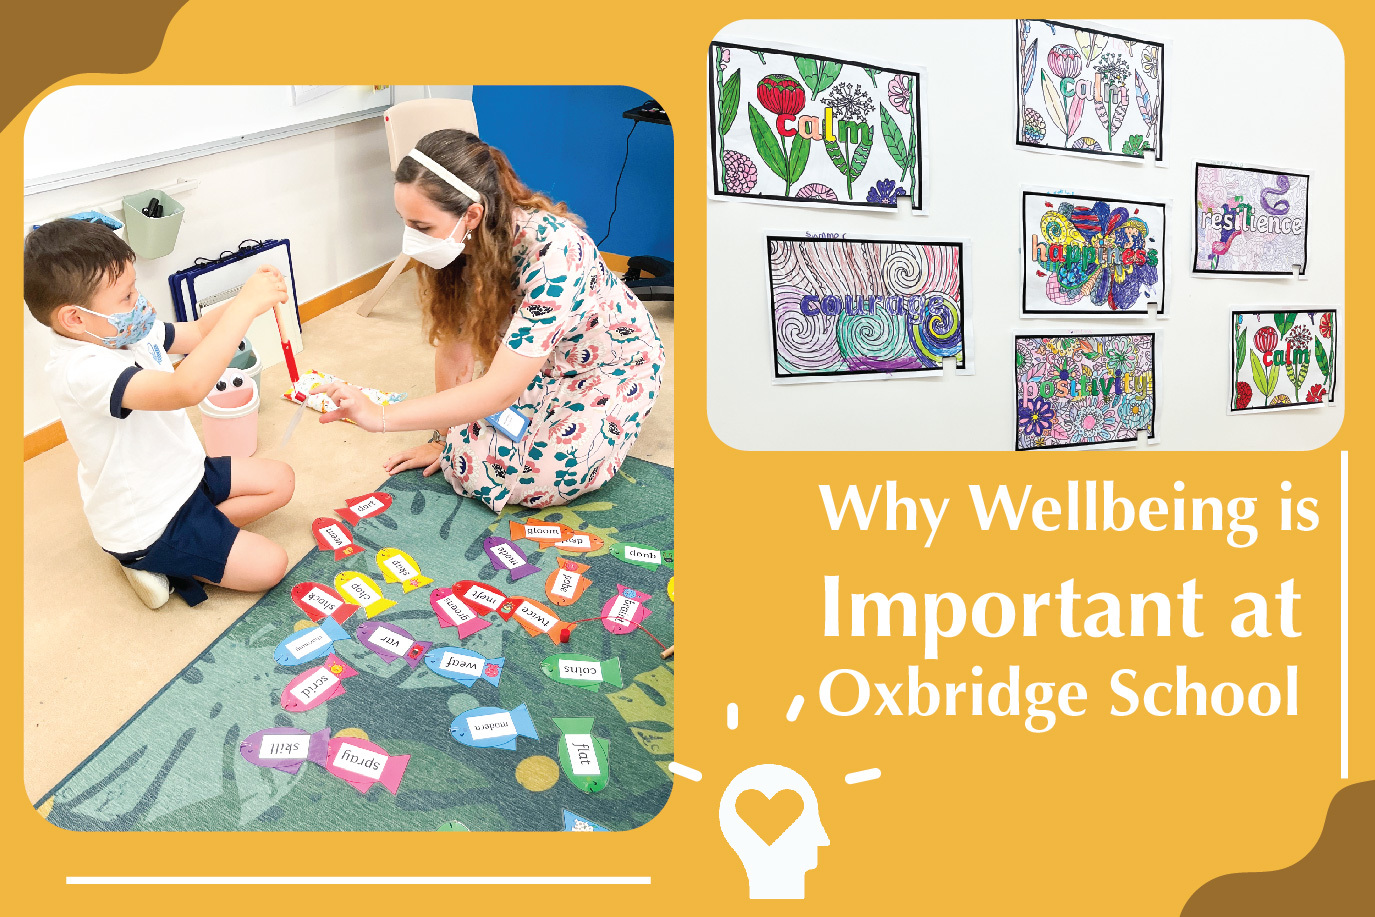 Why Wellbeing is Important at Oxbridge School